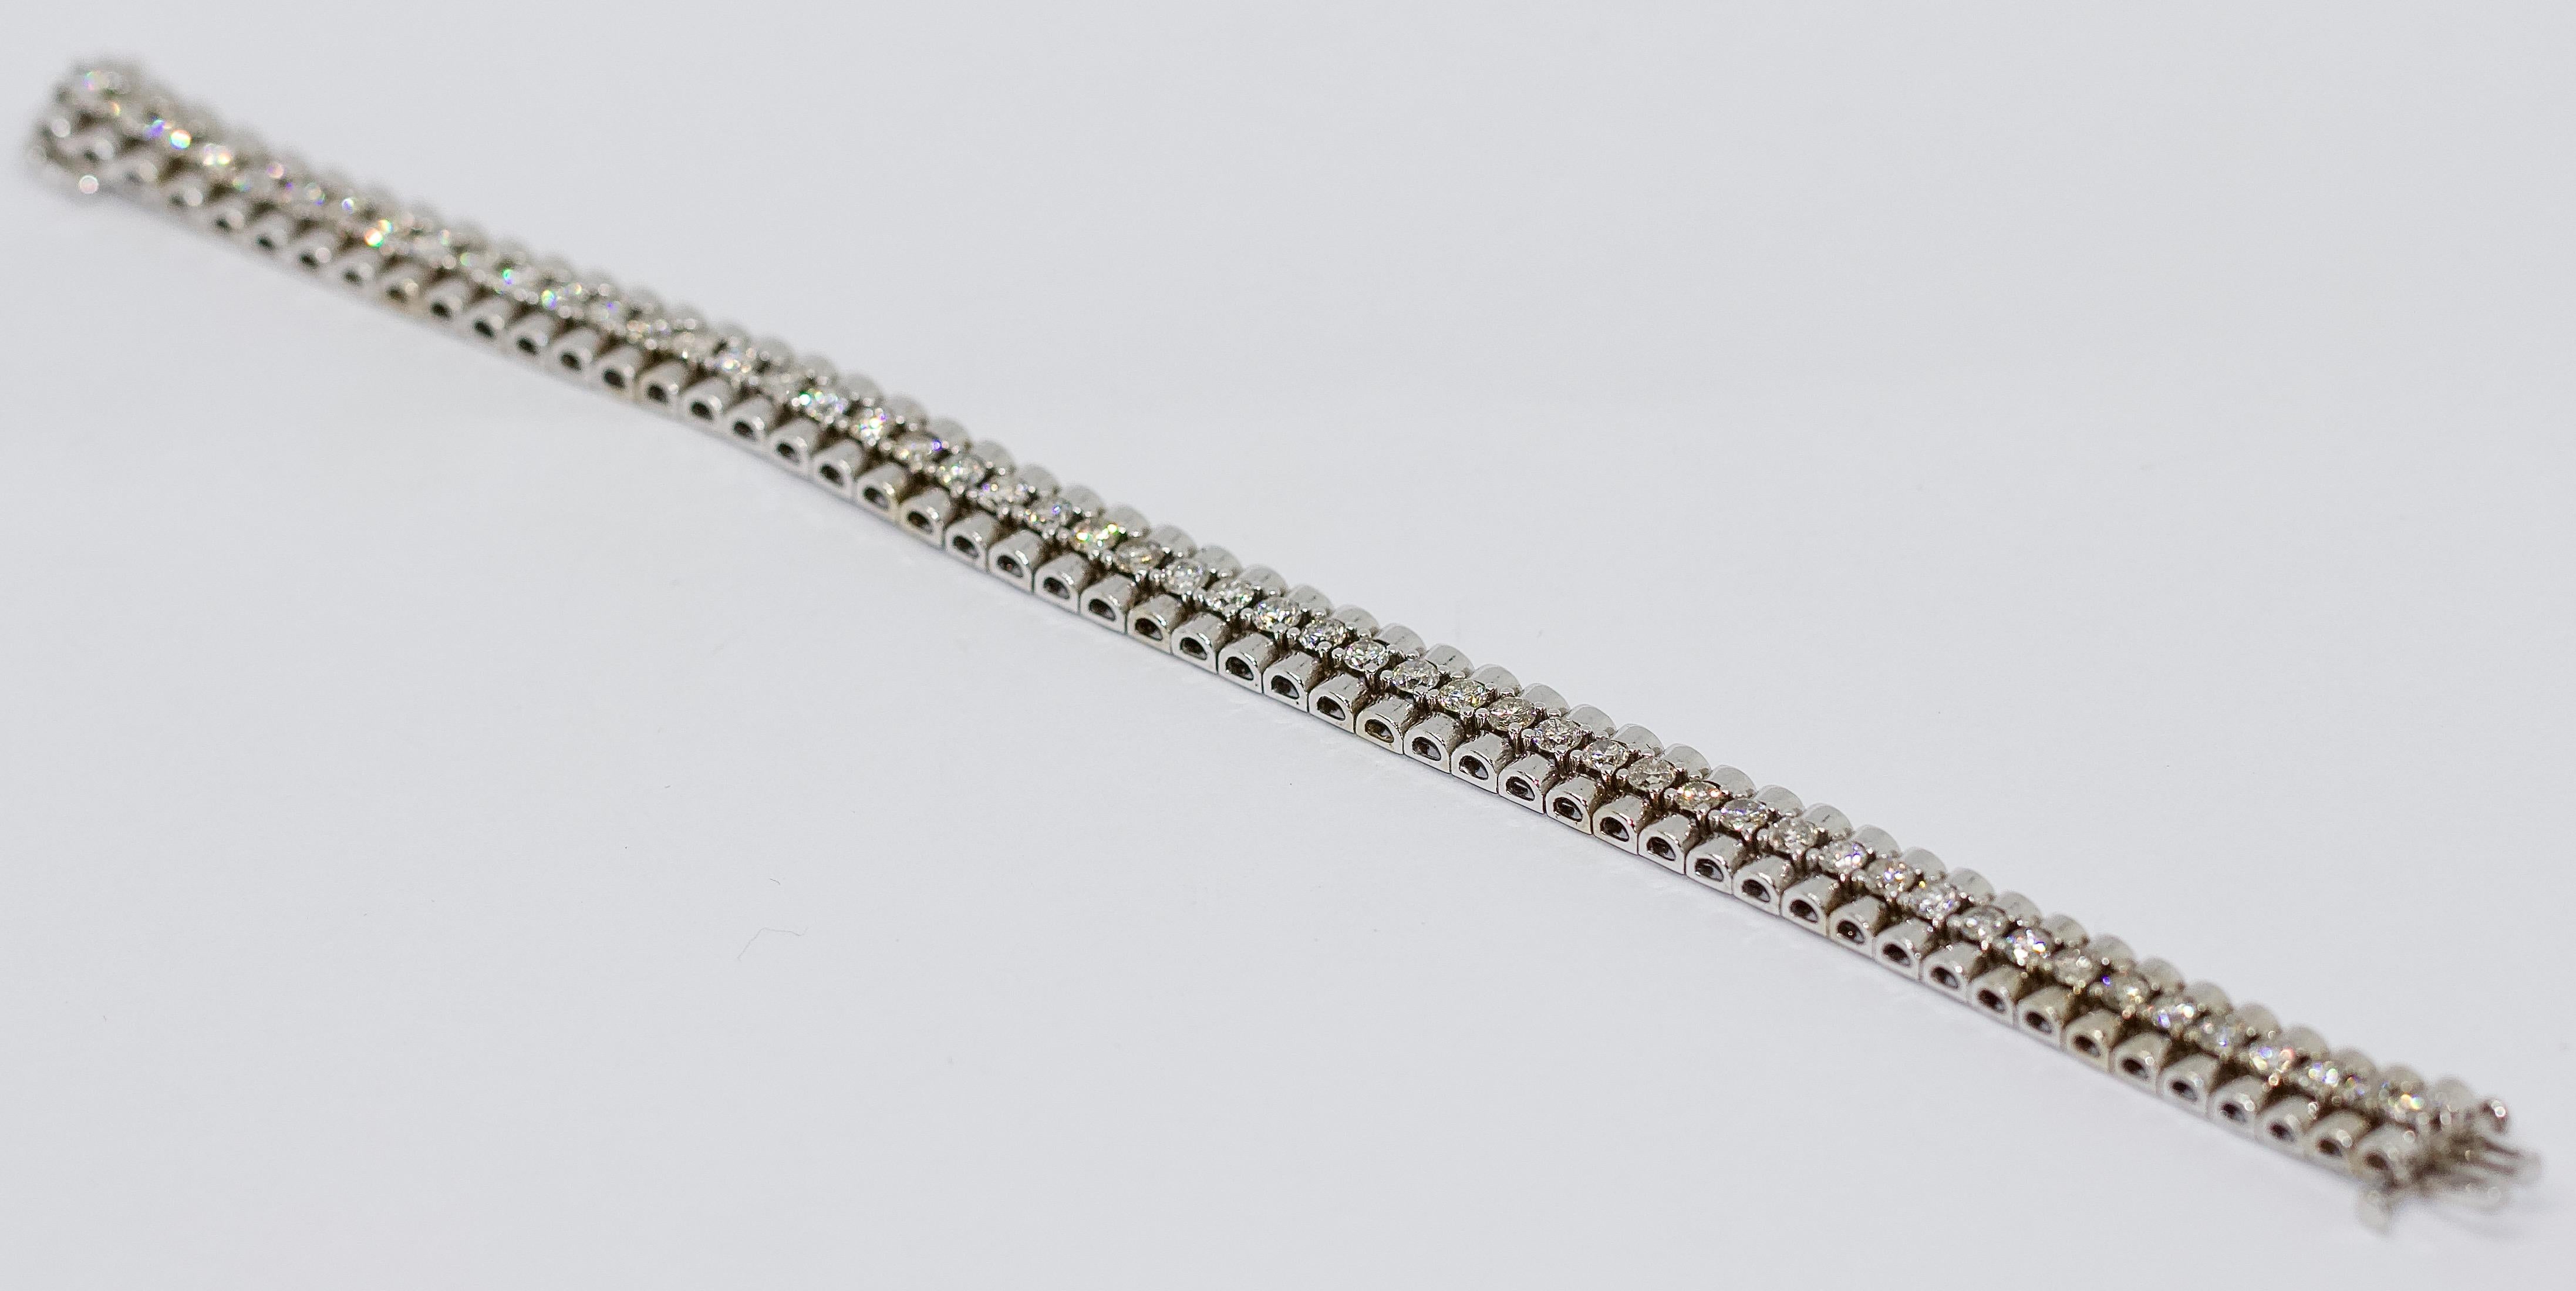 14 Karat White Gold Tennis Bracelet - set with 52 Diamonds. Total almost 5.2 Carat.

Color: Top Wesselton
Clarity: SI - PI

Including certificate of authenticity.